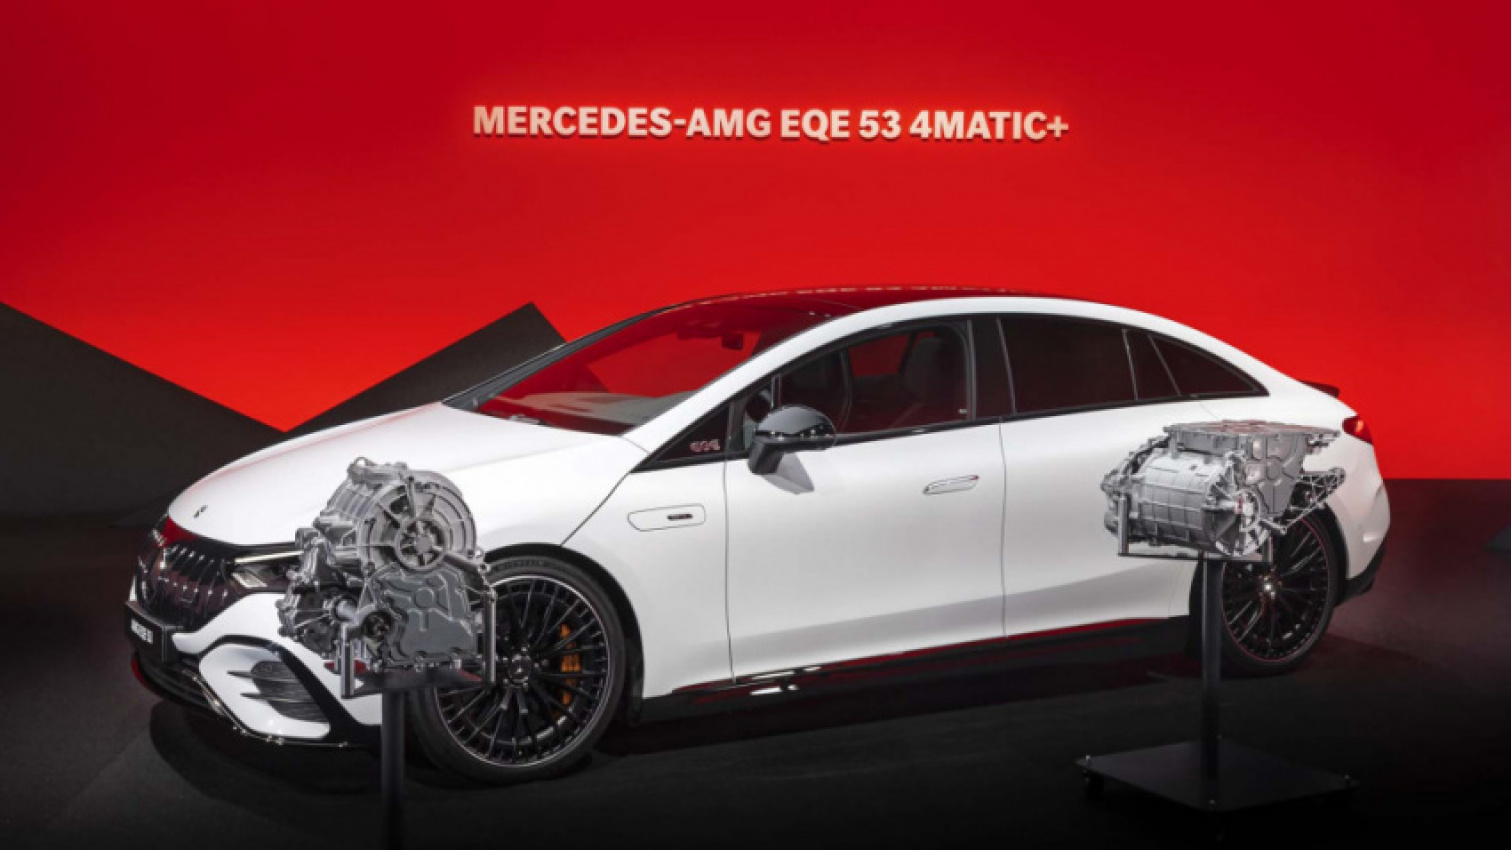 autos, cars, hp, mercedes-benz, mg, electric cars, luxury cars, mercedes, mercedes-benz news, performance, sedans, preview: 2023 mercedes-benz amg eqe electric super sedan revealed with up to 677 hp